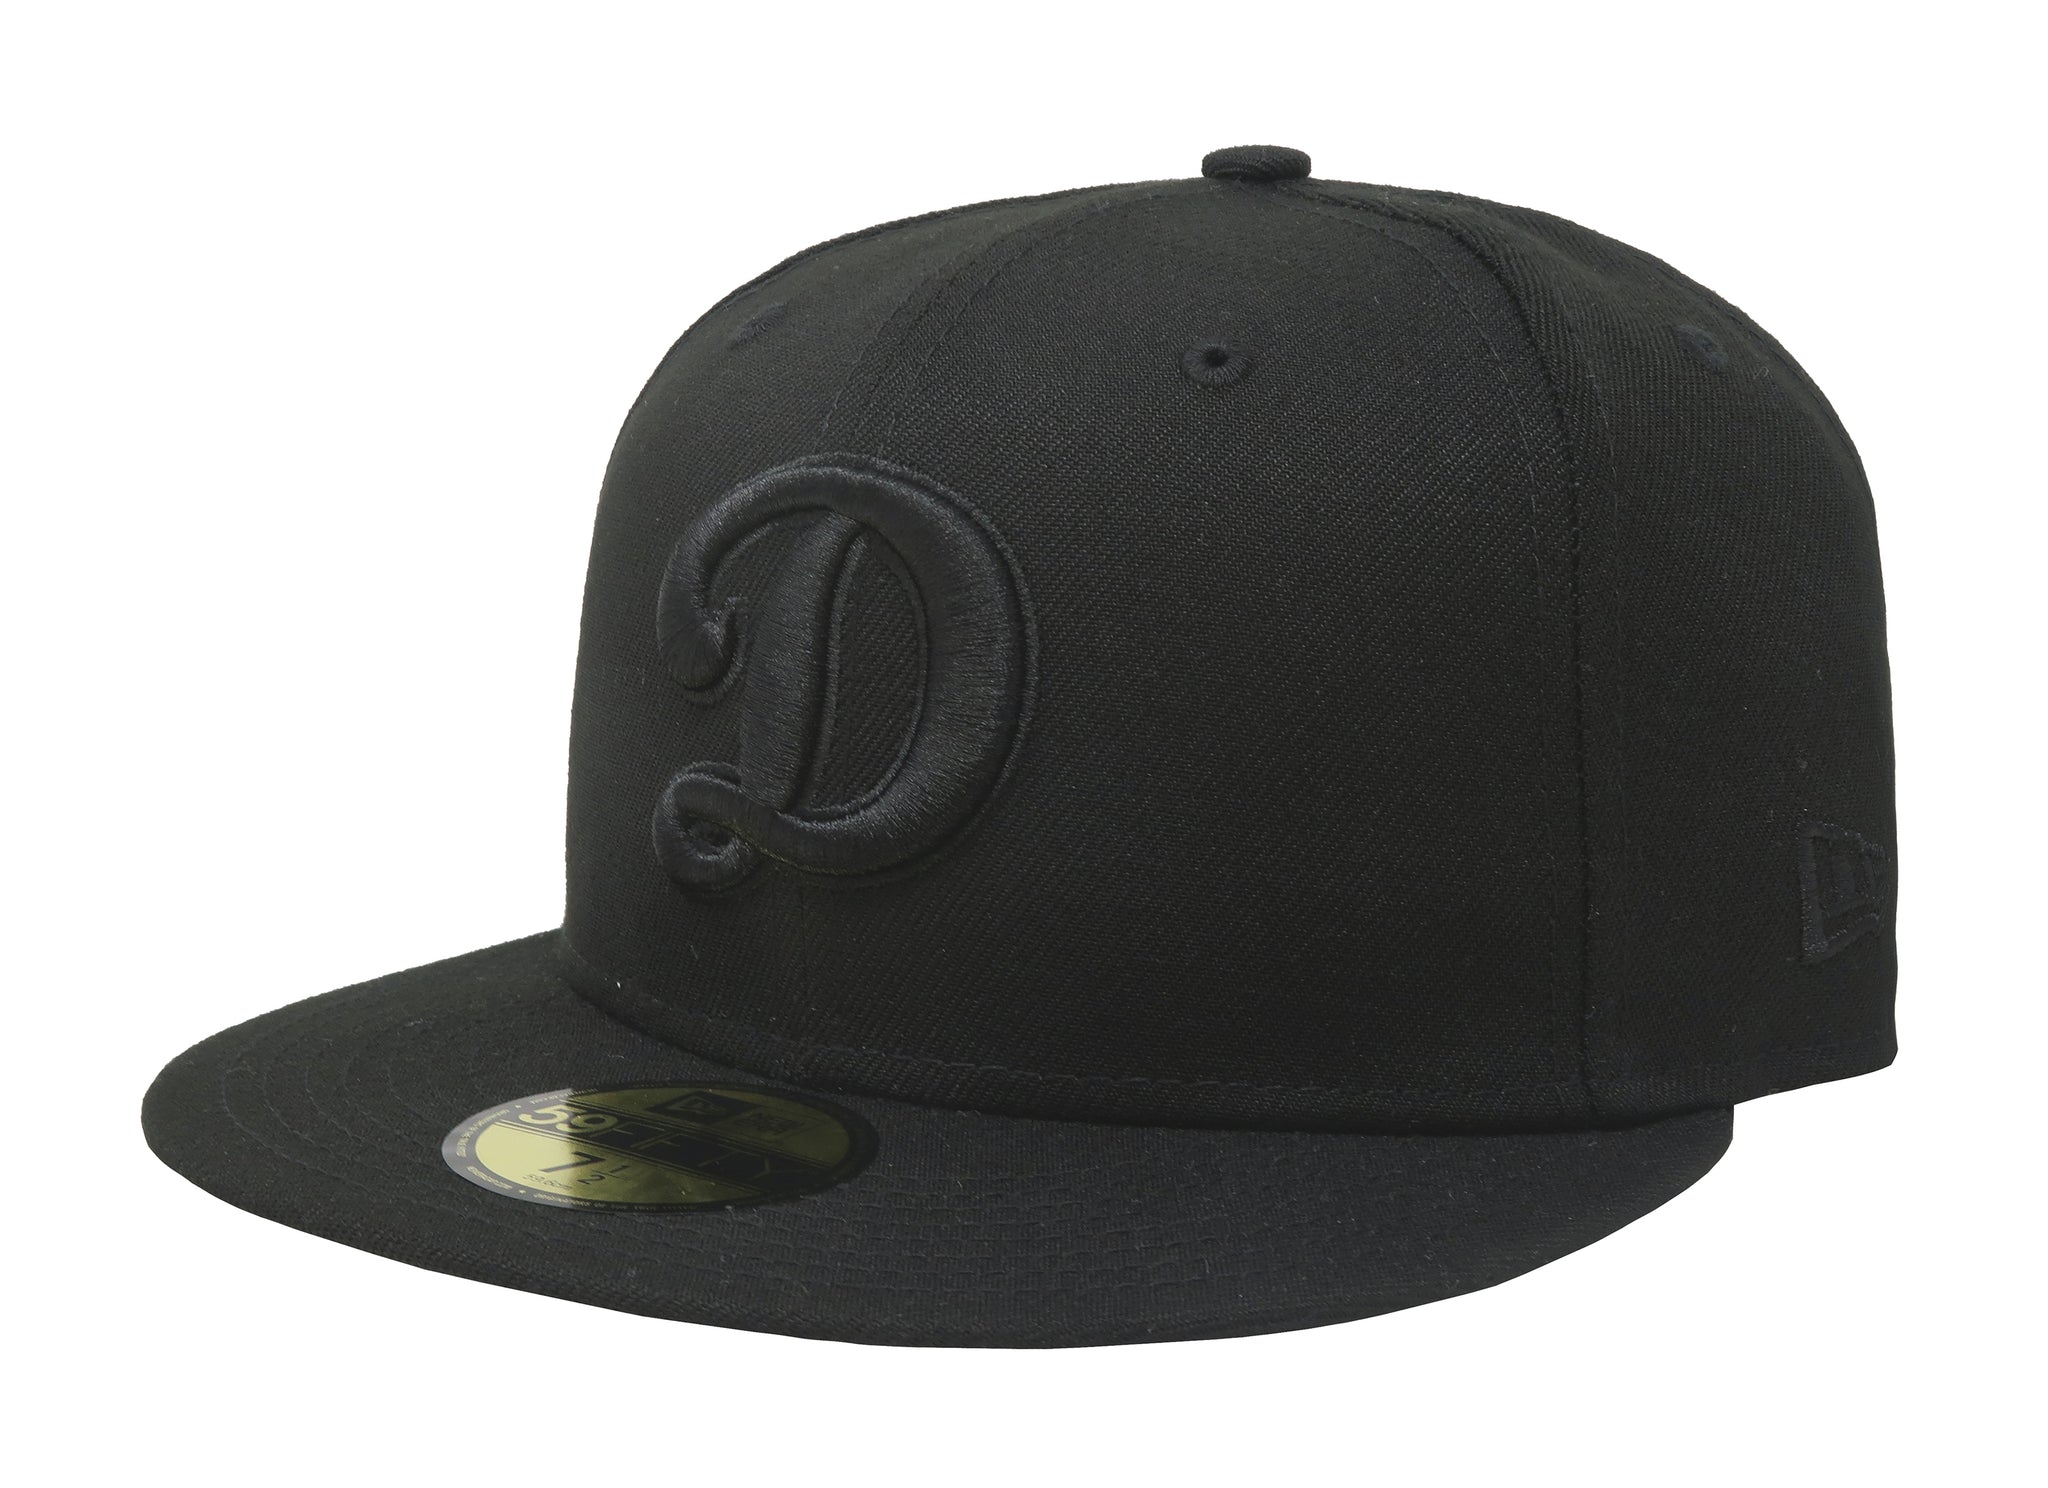 New Era 59Fifty Men's Los Angeles Dodgers Black on Black Fitted Cap